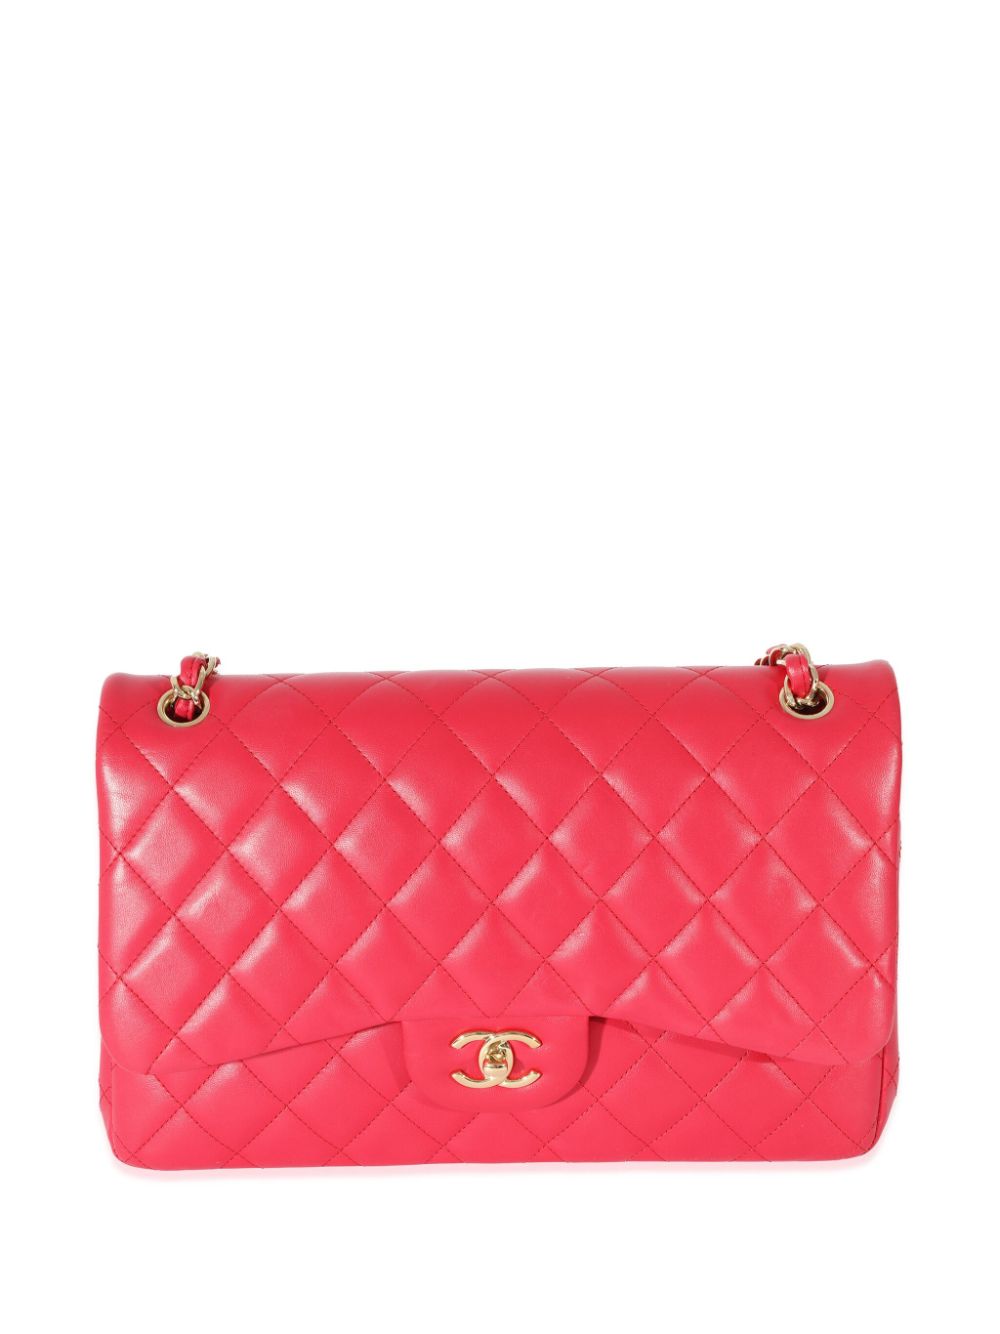 Chanel Pre-owned Double Flap Jumbo Shoulder Bag - Red